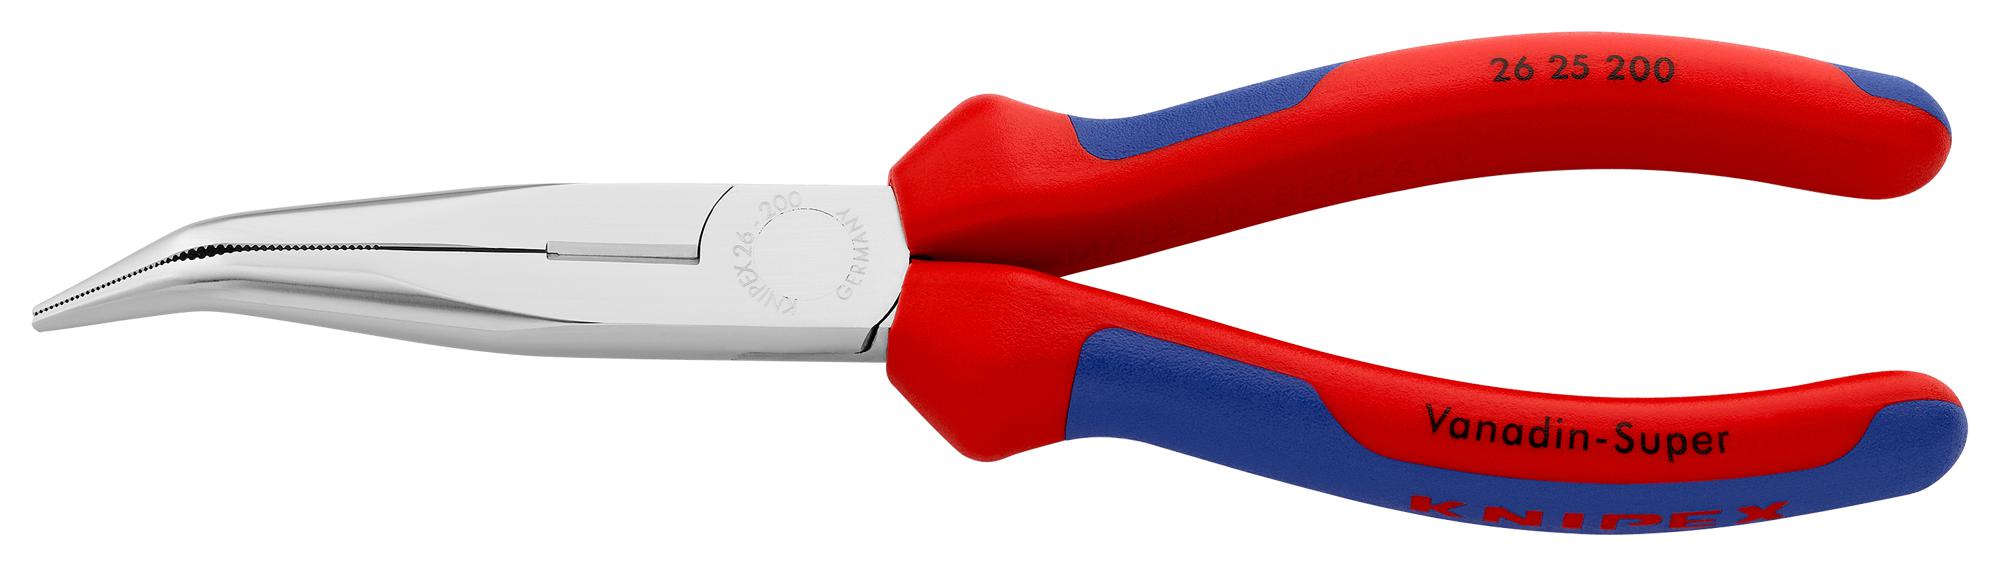 26 25 200 COMBINATION PLIER, 200MM KNIPEX